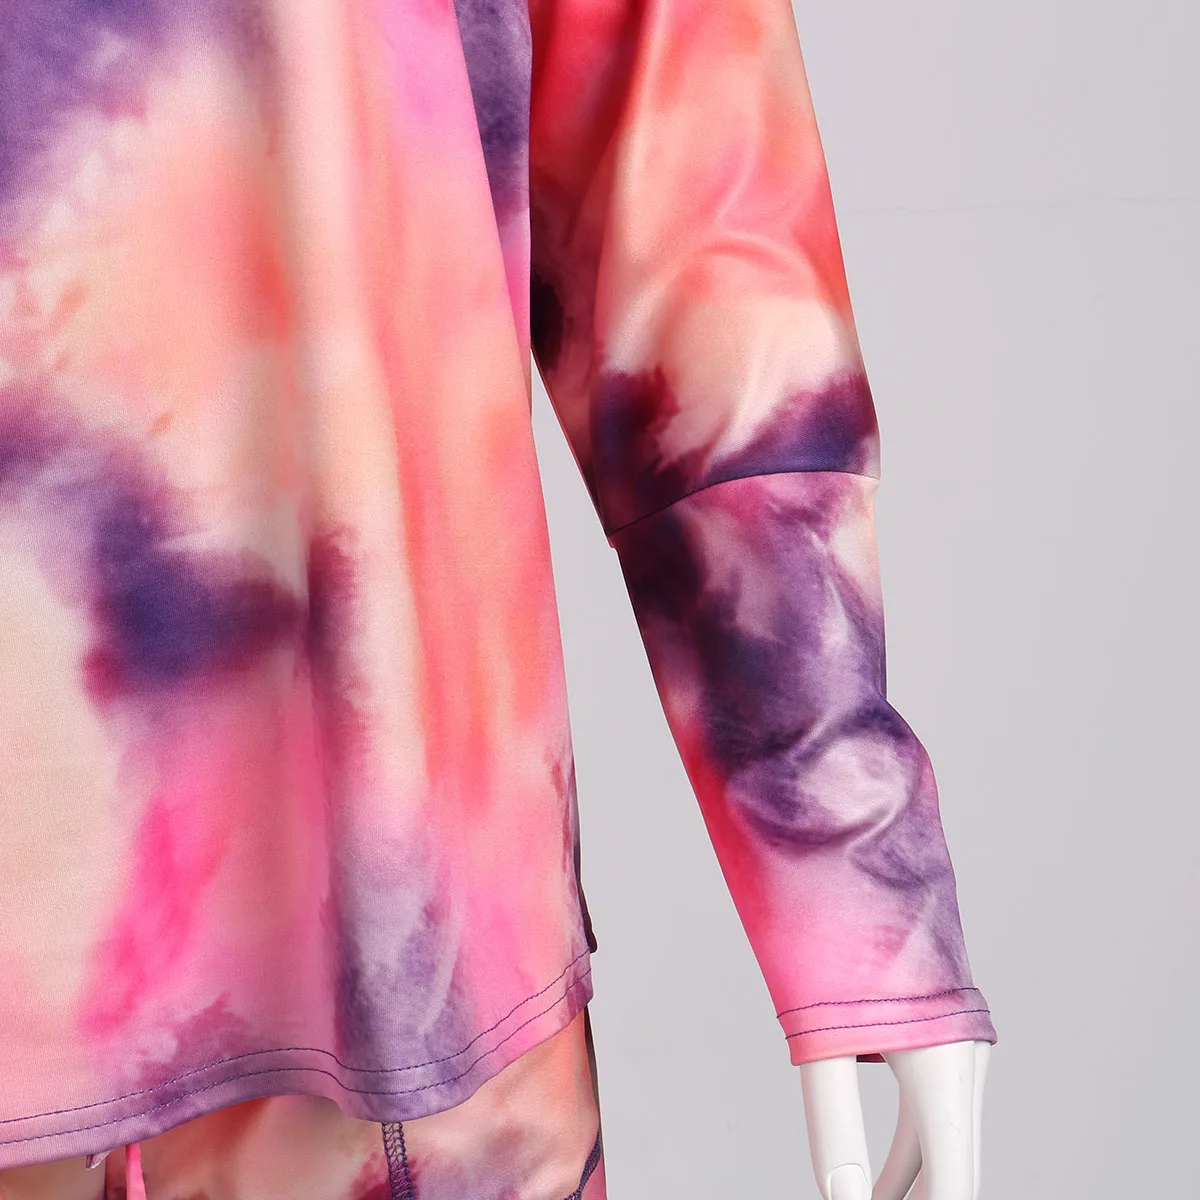 womens underwear sets hirigin New Tie Dye Colorful 2Pieces Sets Women Tracksuits Casual Long Sleeve Pullovers Lace Up Shorts with Pockets Outfits lounge wear sets